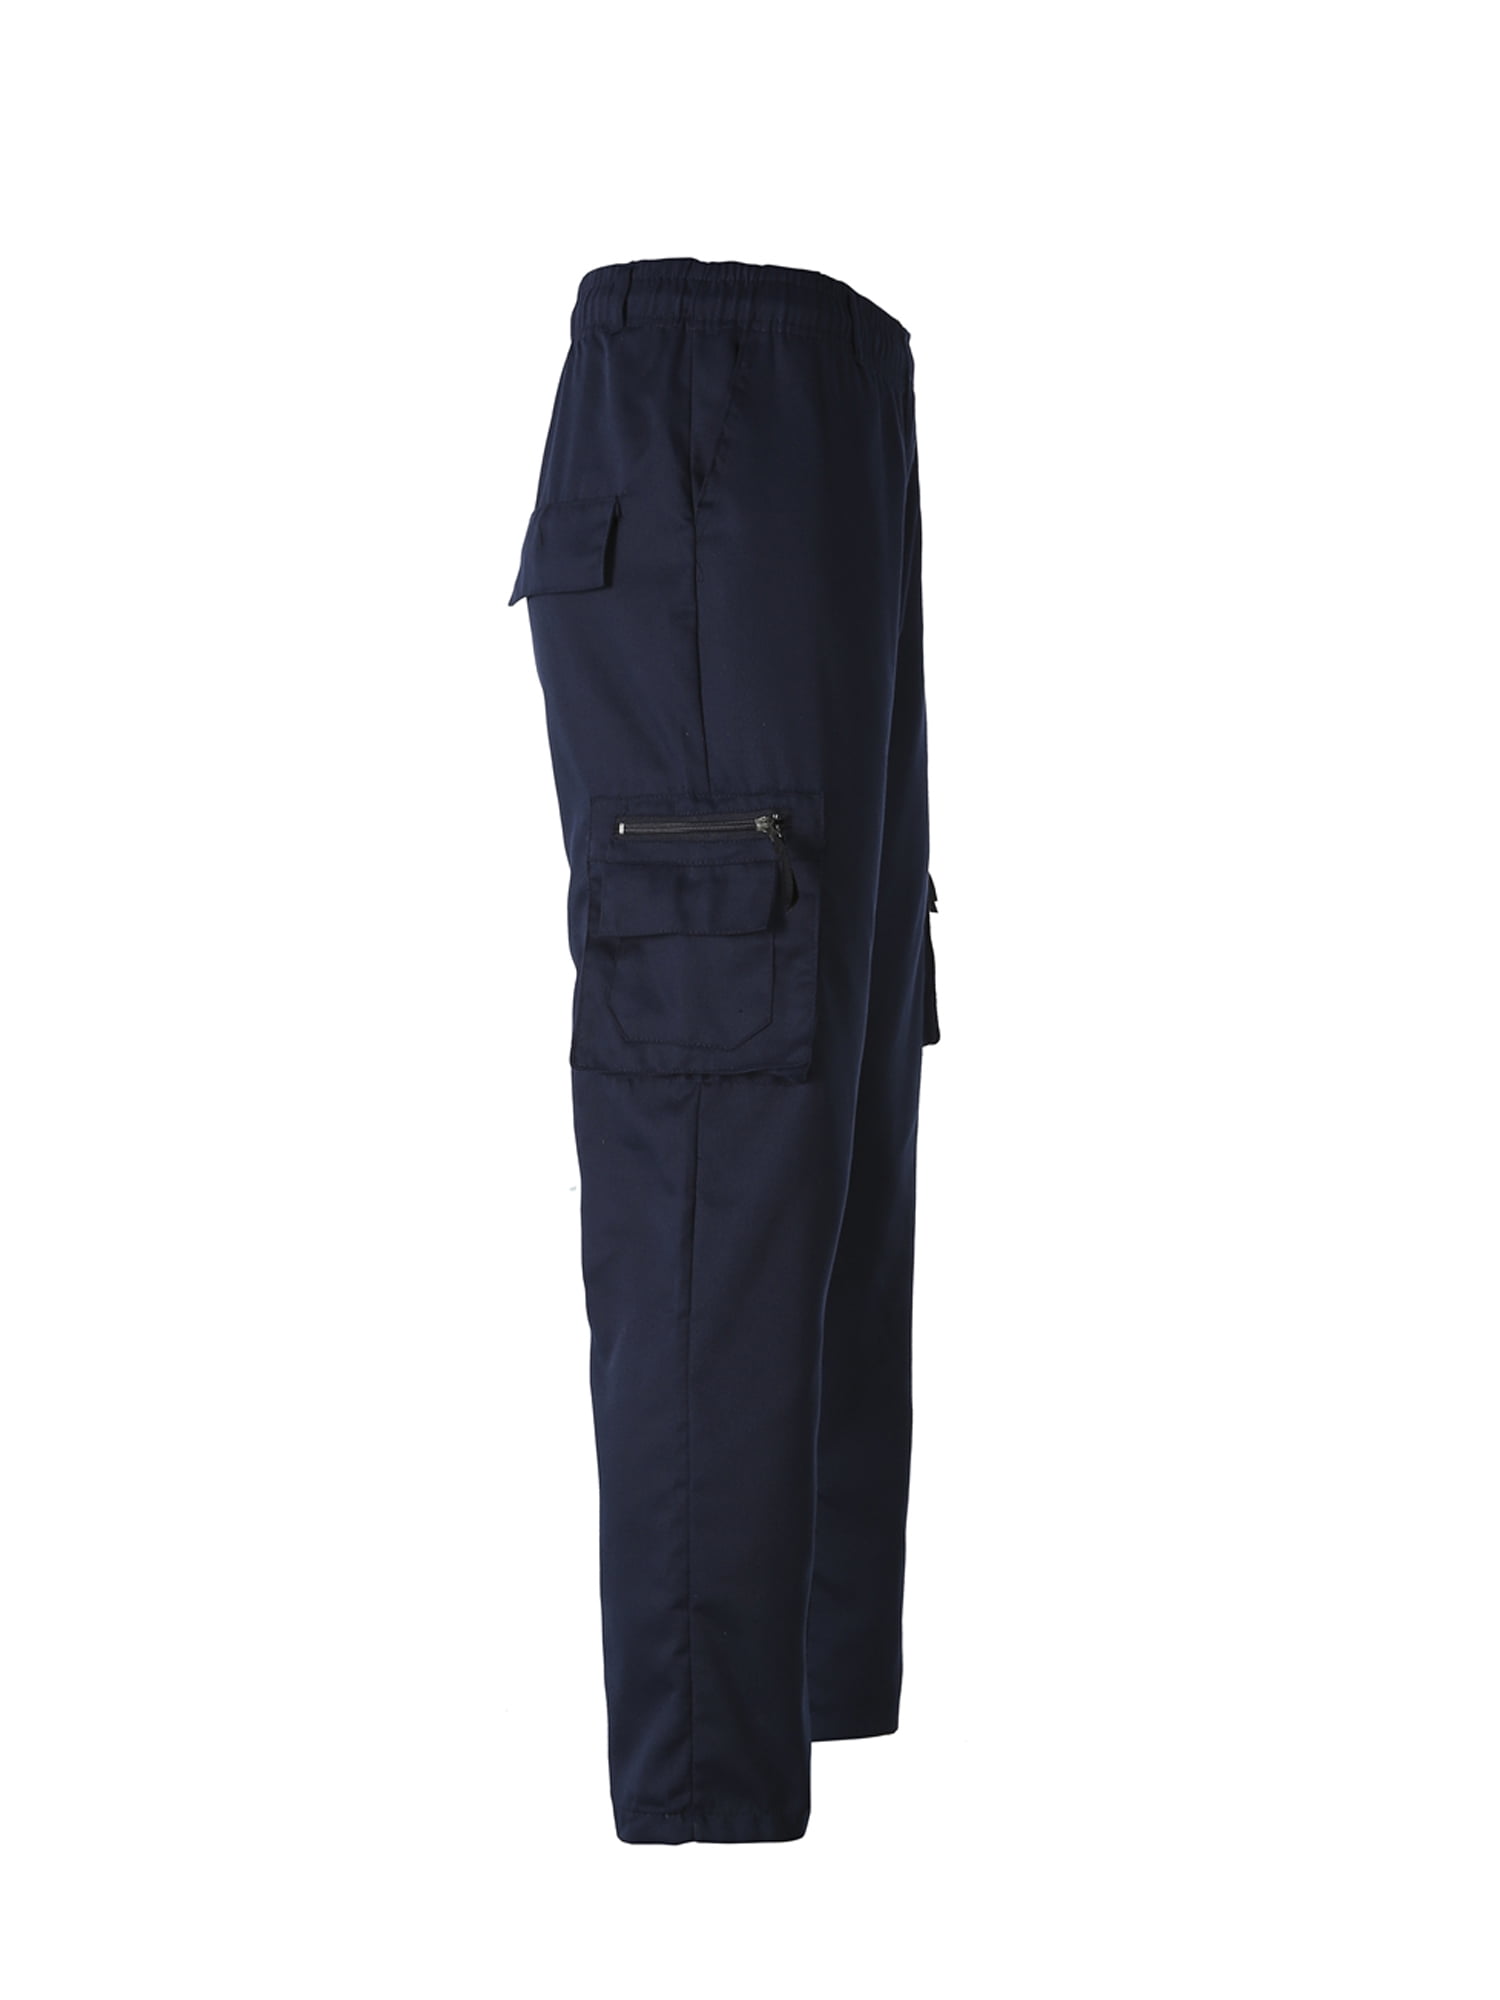 MEN'S HEAVY DUTY CARGO TROUSERS WARRIOR BRAND NAVY BLUE * REDUCED PRICE * 